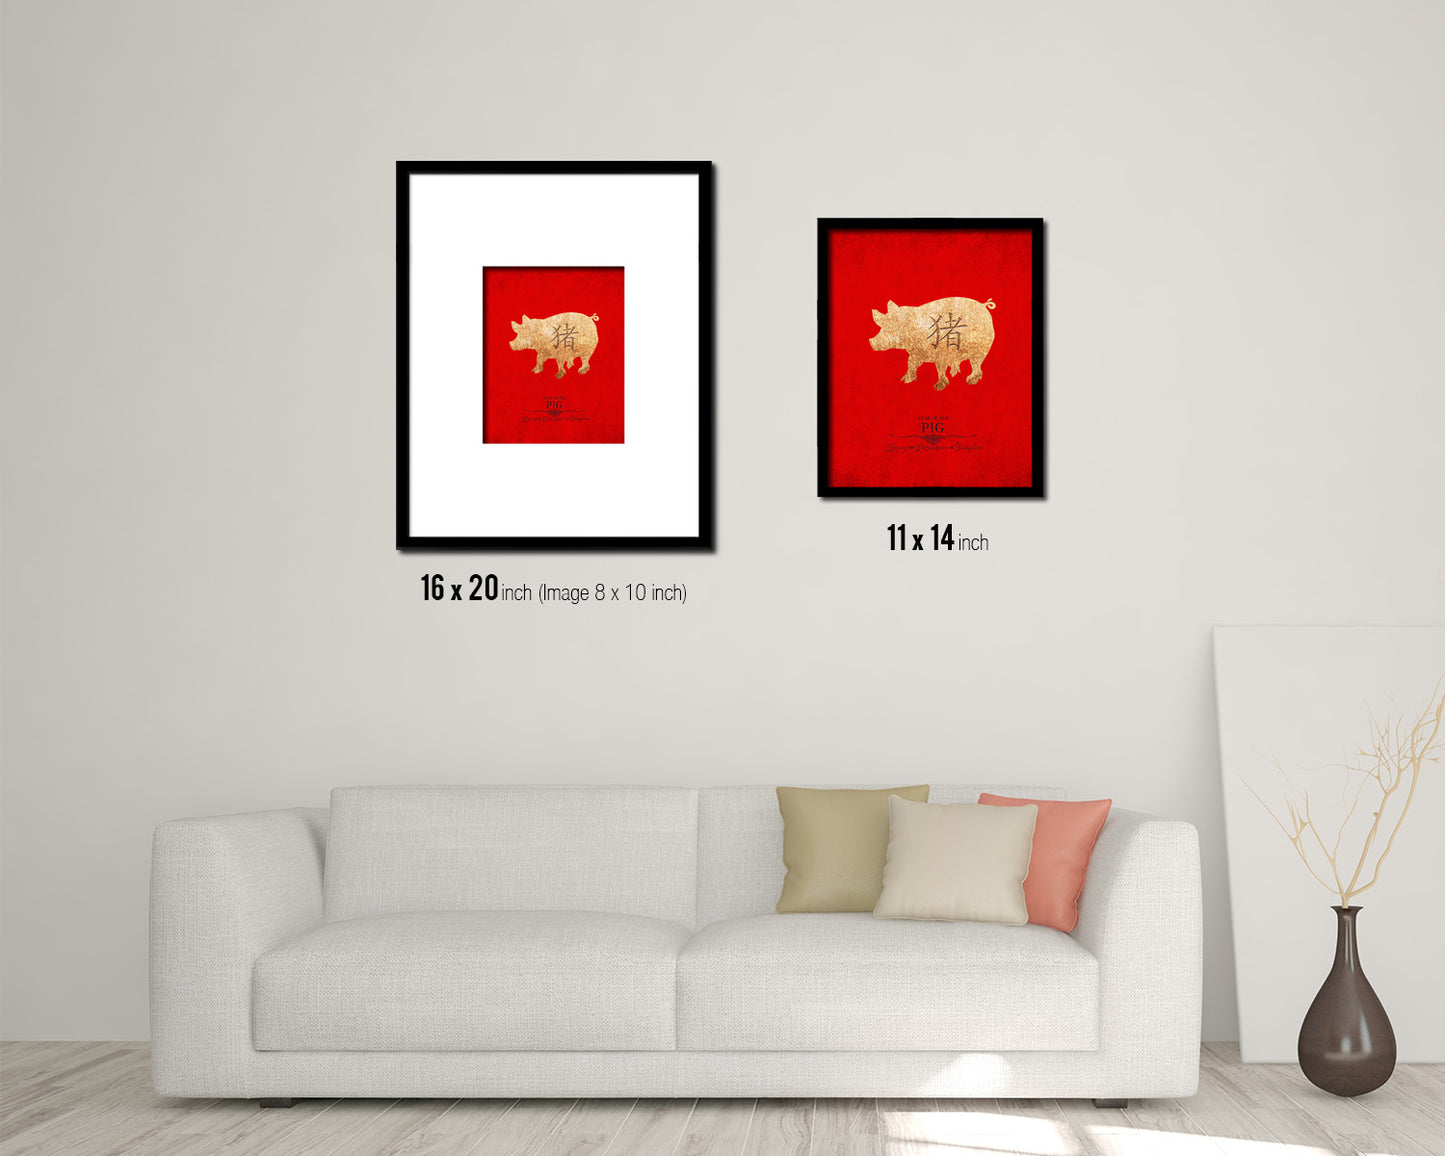 Pig Chinese Zodiac Character Black Framed Art Paper Print Wall Art Decor Gifts, Red